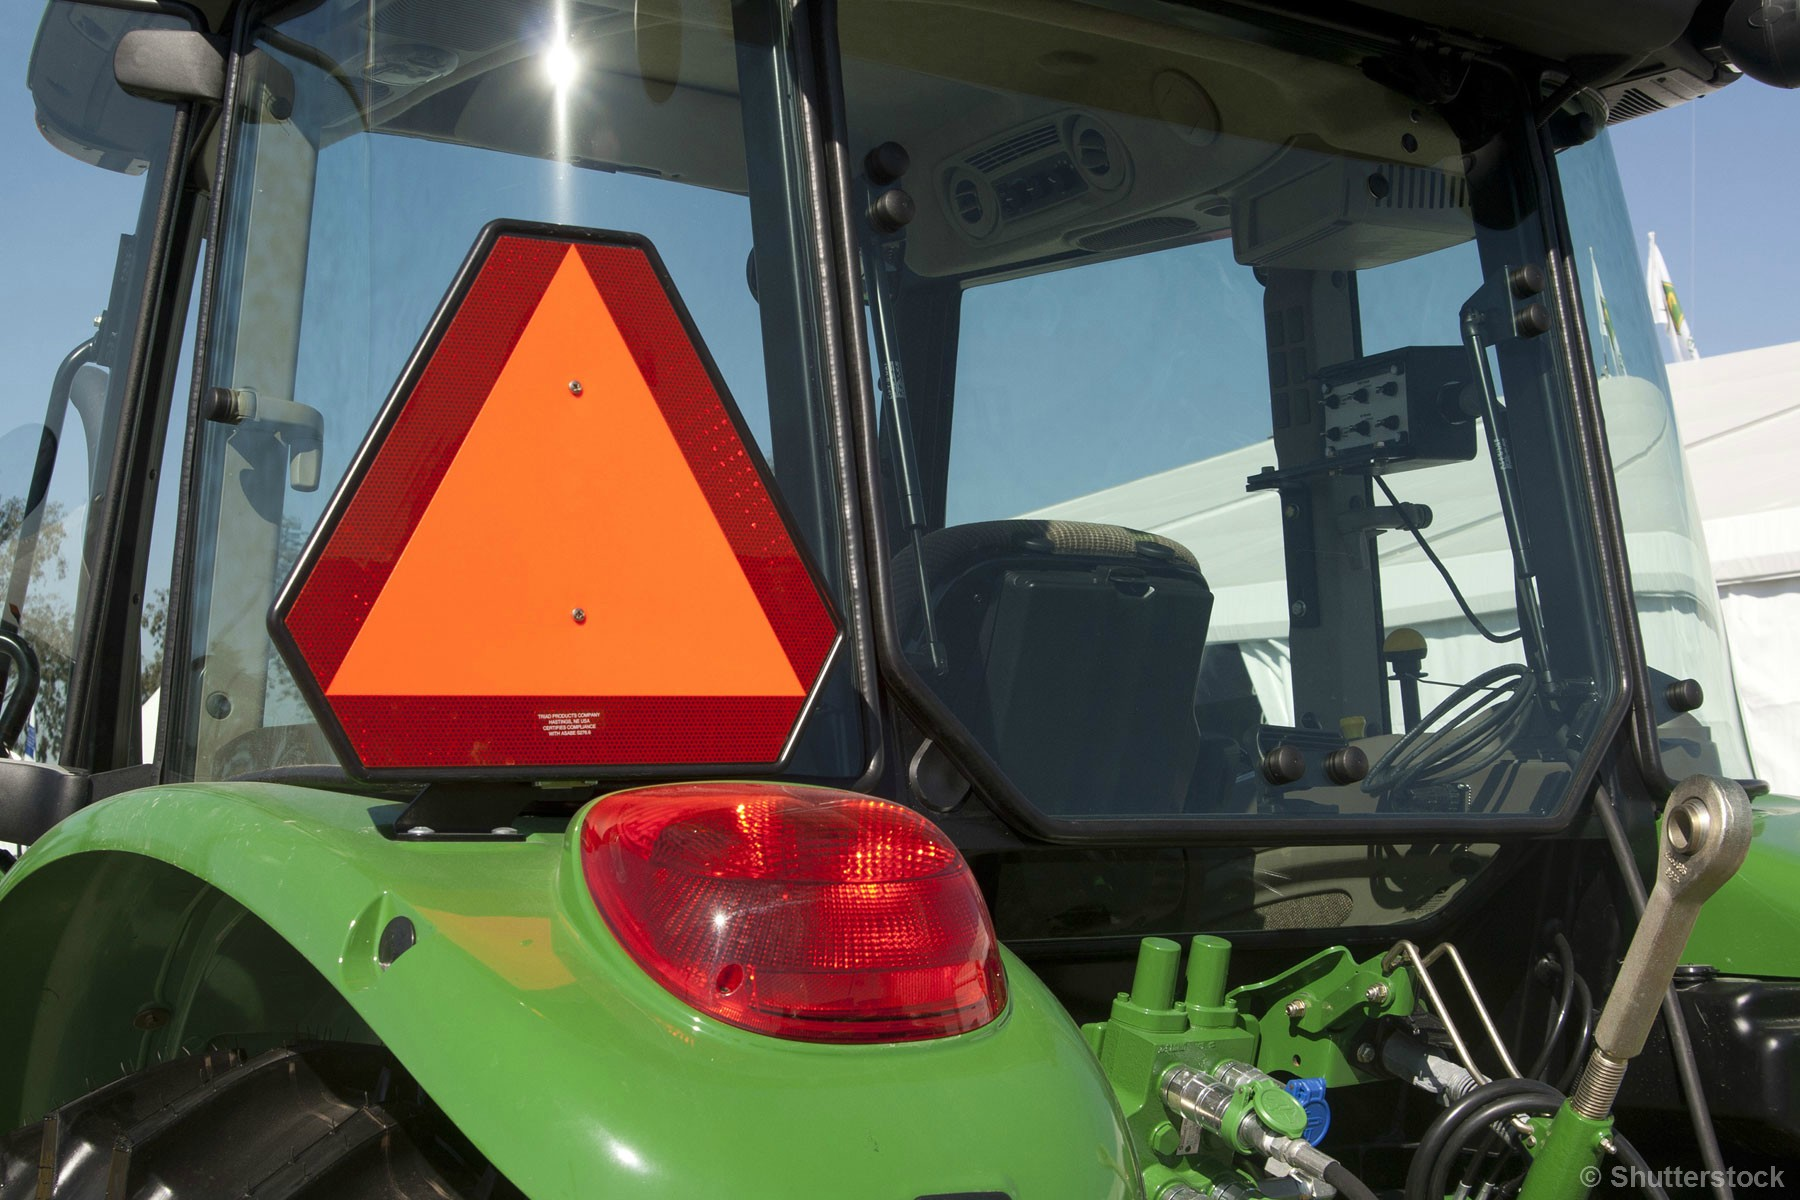 Is the tractor buddy seat dangerous?